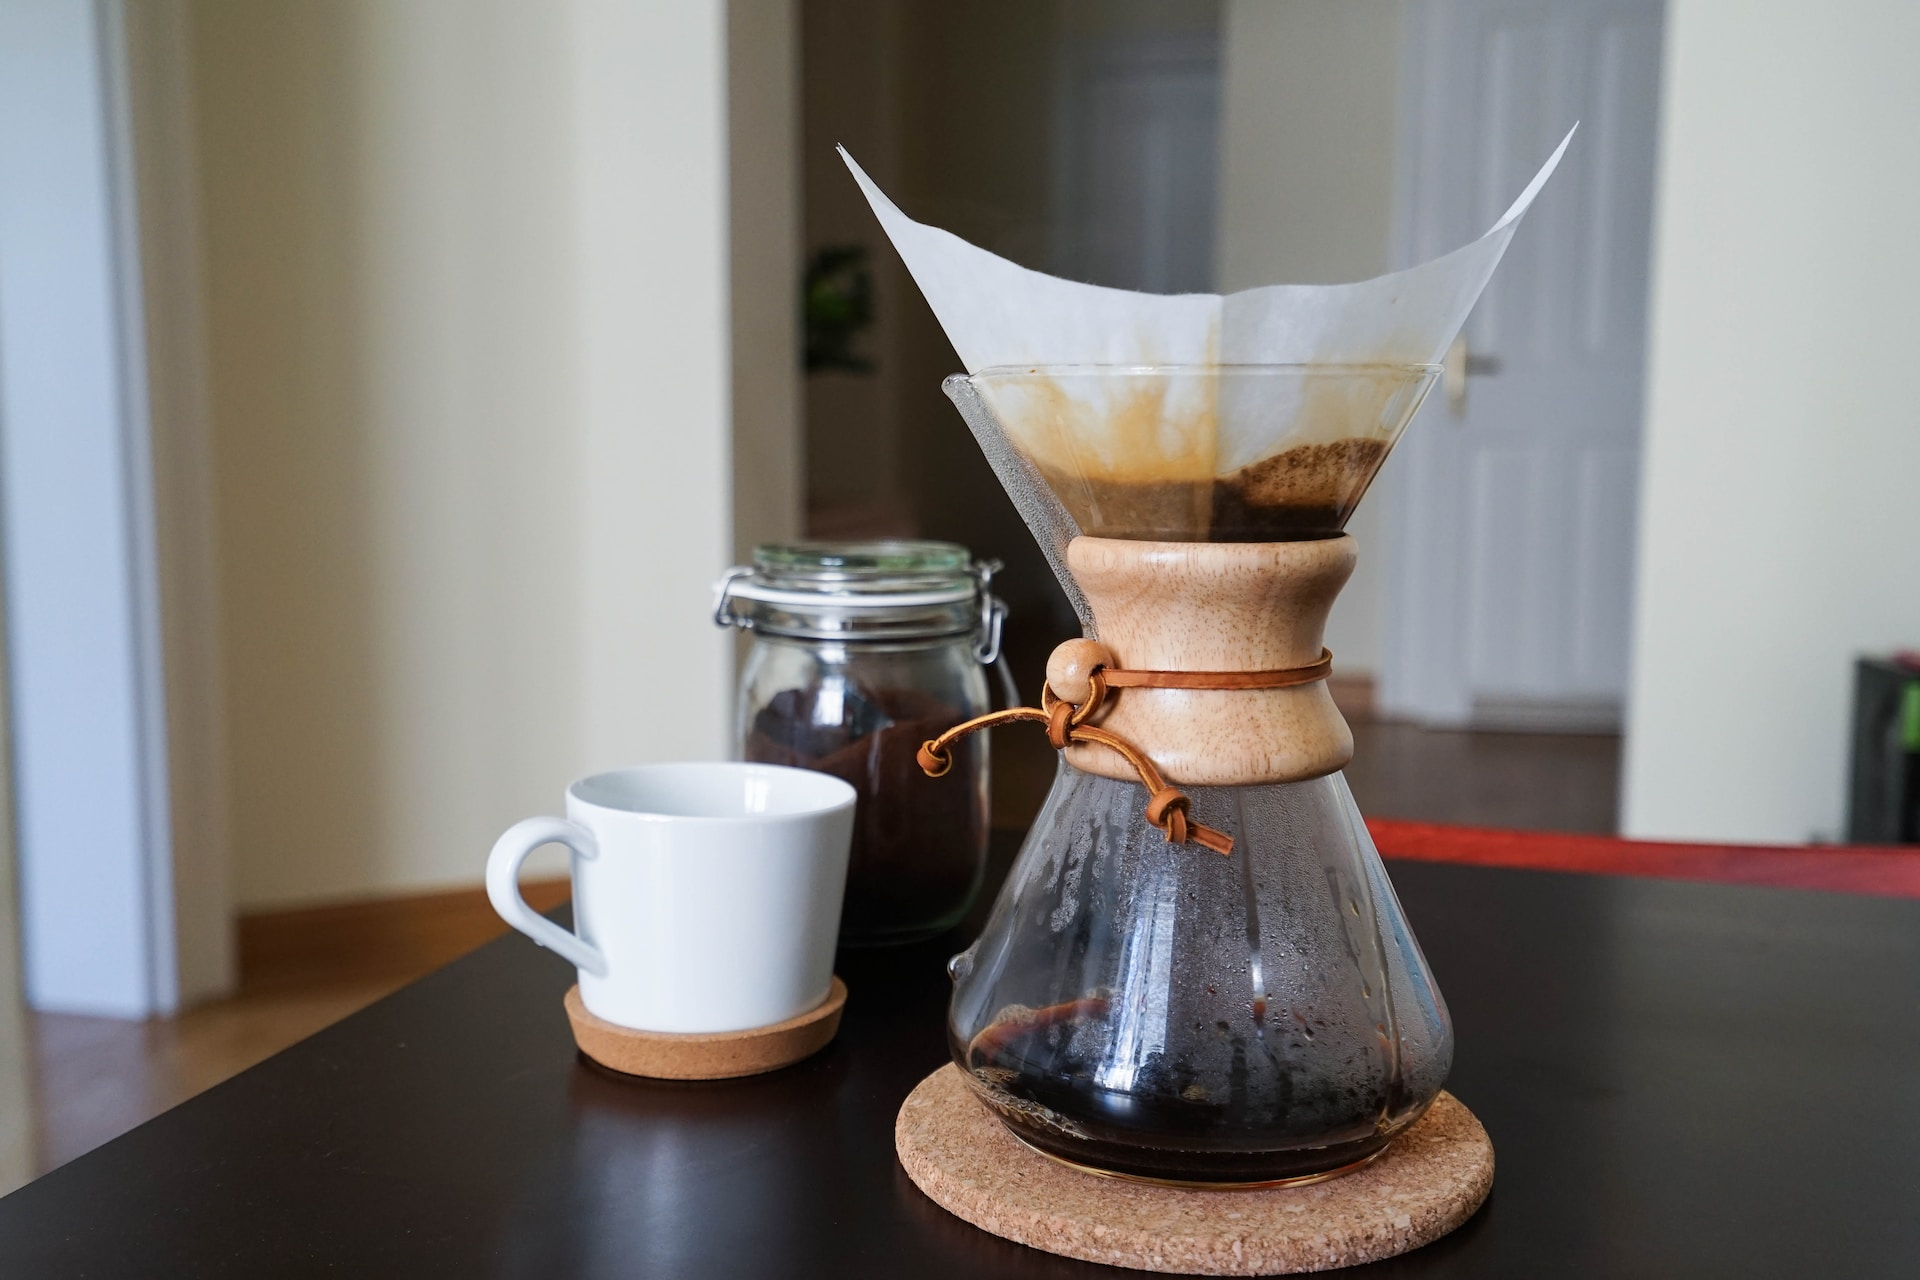 A home brewing drip coffee setup on a black table